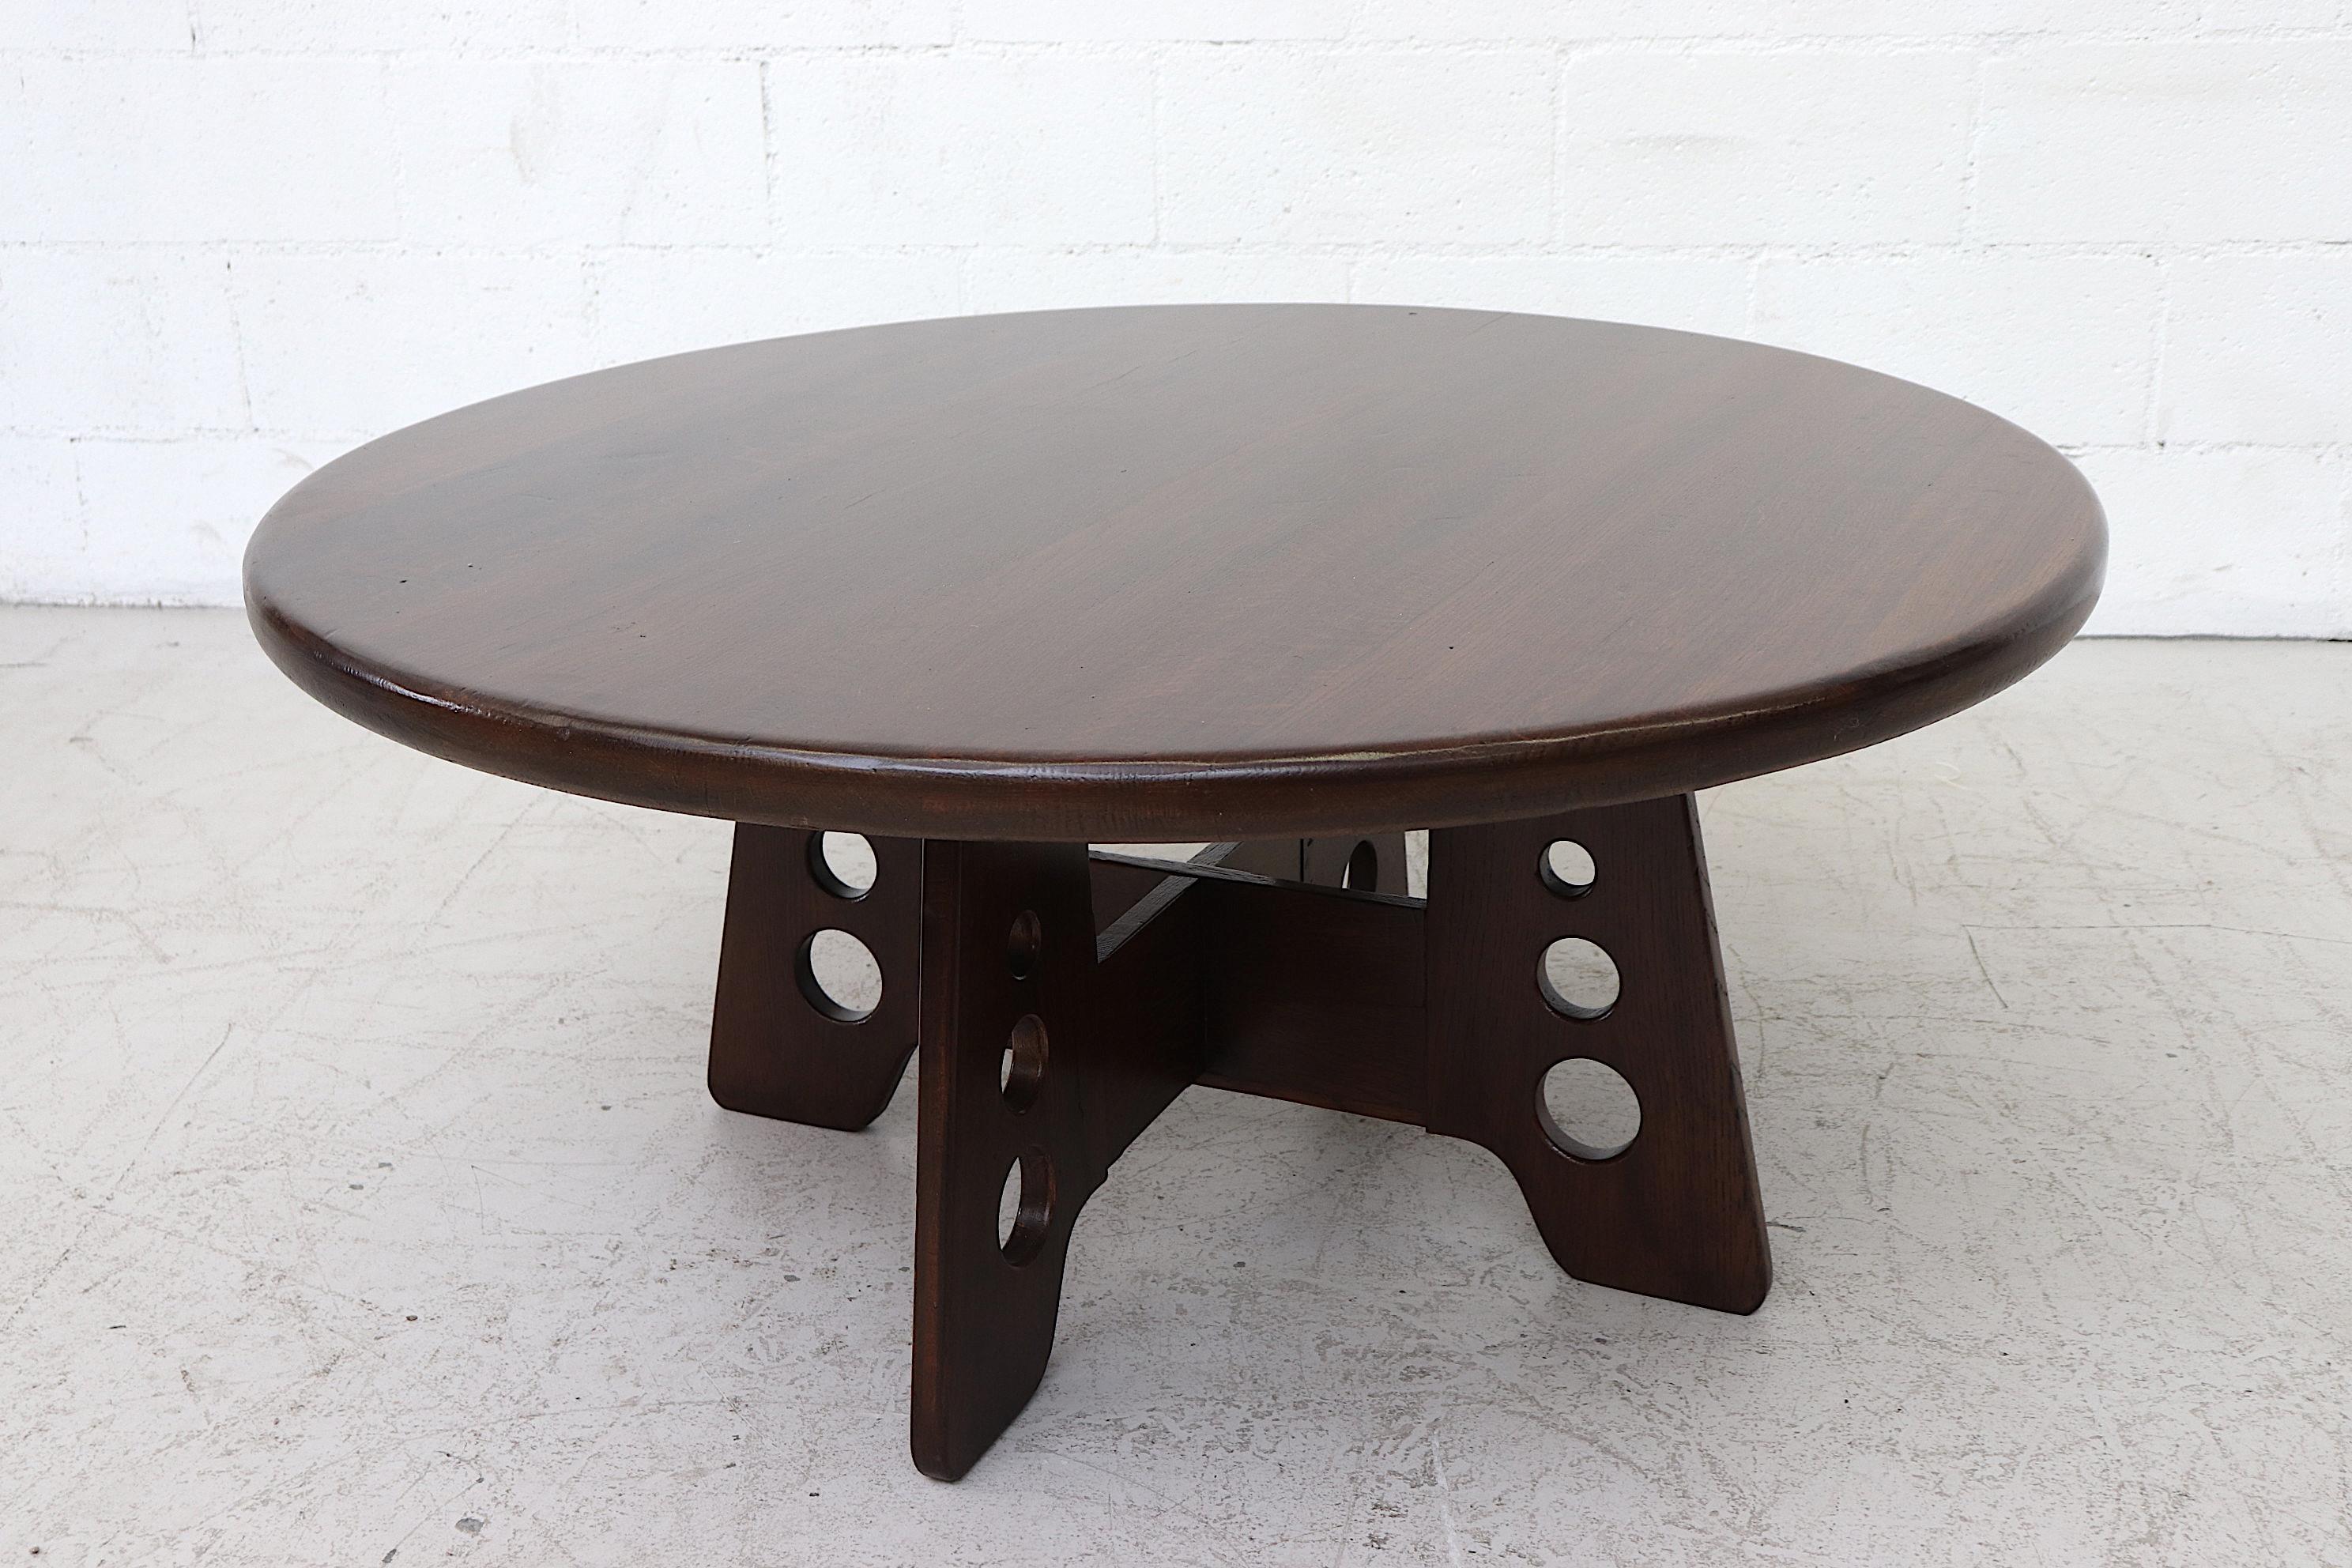 Round dark stained oak Gilbert Marklund (attribute) Brutalist coffee table. Lightly refinished with round cut-outs in matching wood legs. In original condition with wear attributed to age and use. Another light oak table available (LU922415583492)